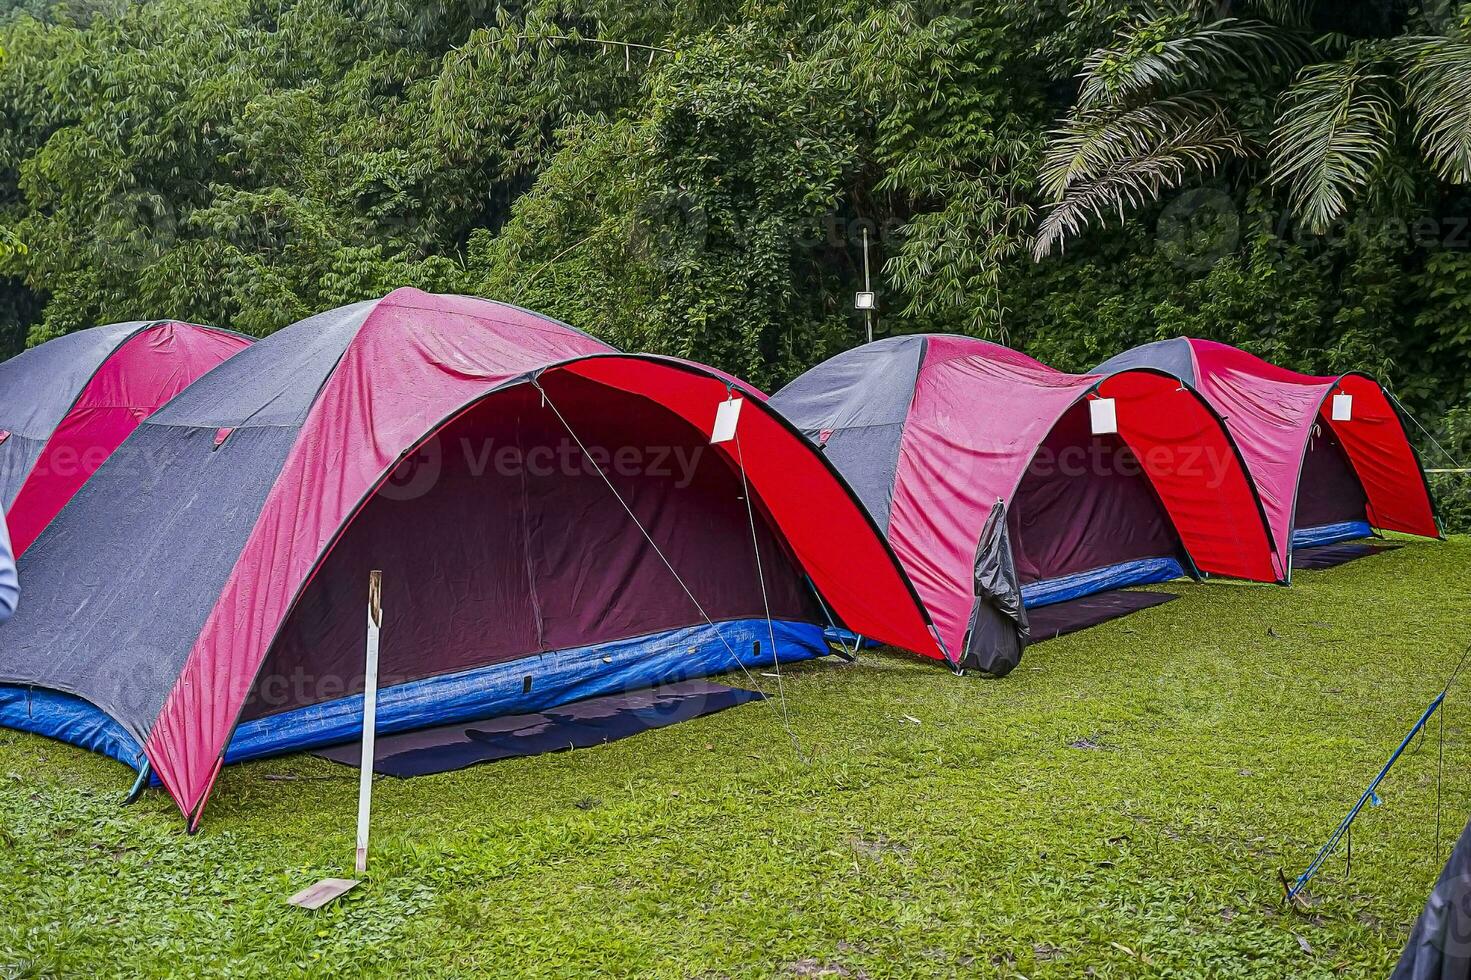 Rows of tents are built for sleeping when carrying out holidays with family. photo